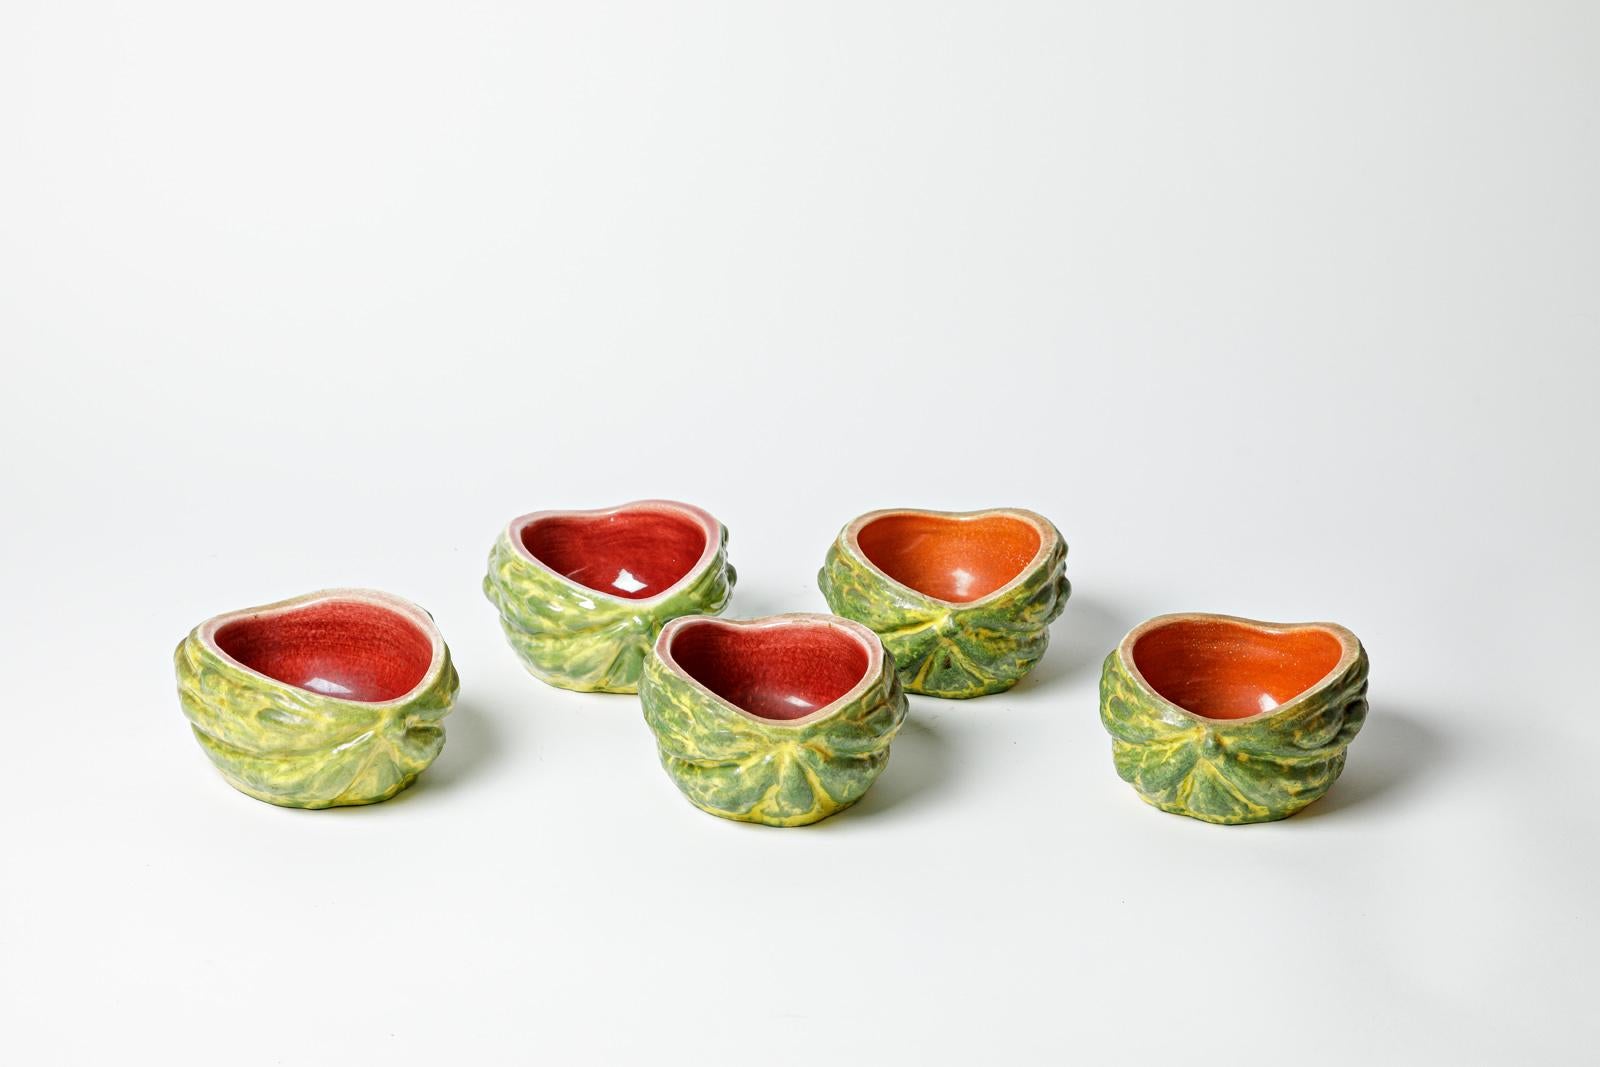 Pol Chambost

Signed MADE IN FRANCE and documented in the famous book Pol Chambost, sculpteur-céramiste, 1906 - 1983

Set of 5 ceramic dishes or vide poche 

Green, orange and red ceramic glazes colors

All in original perfect conditions

Height 7